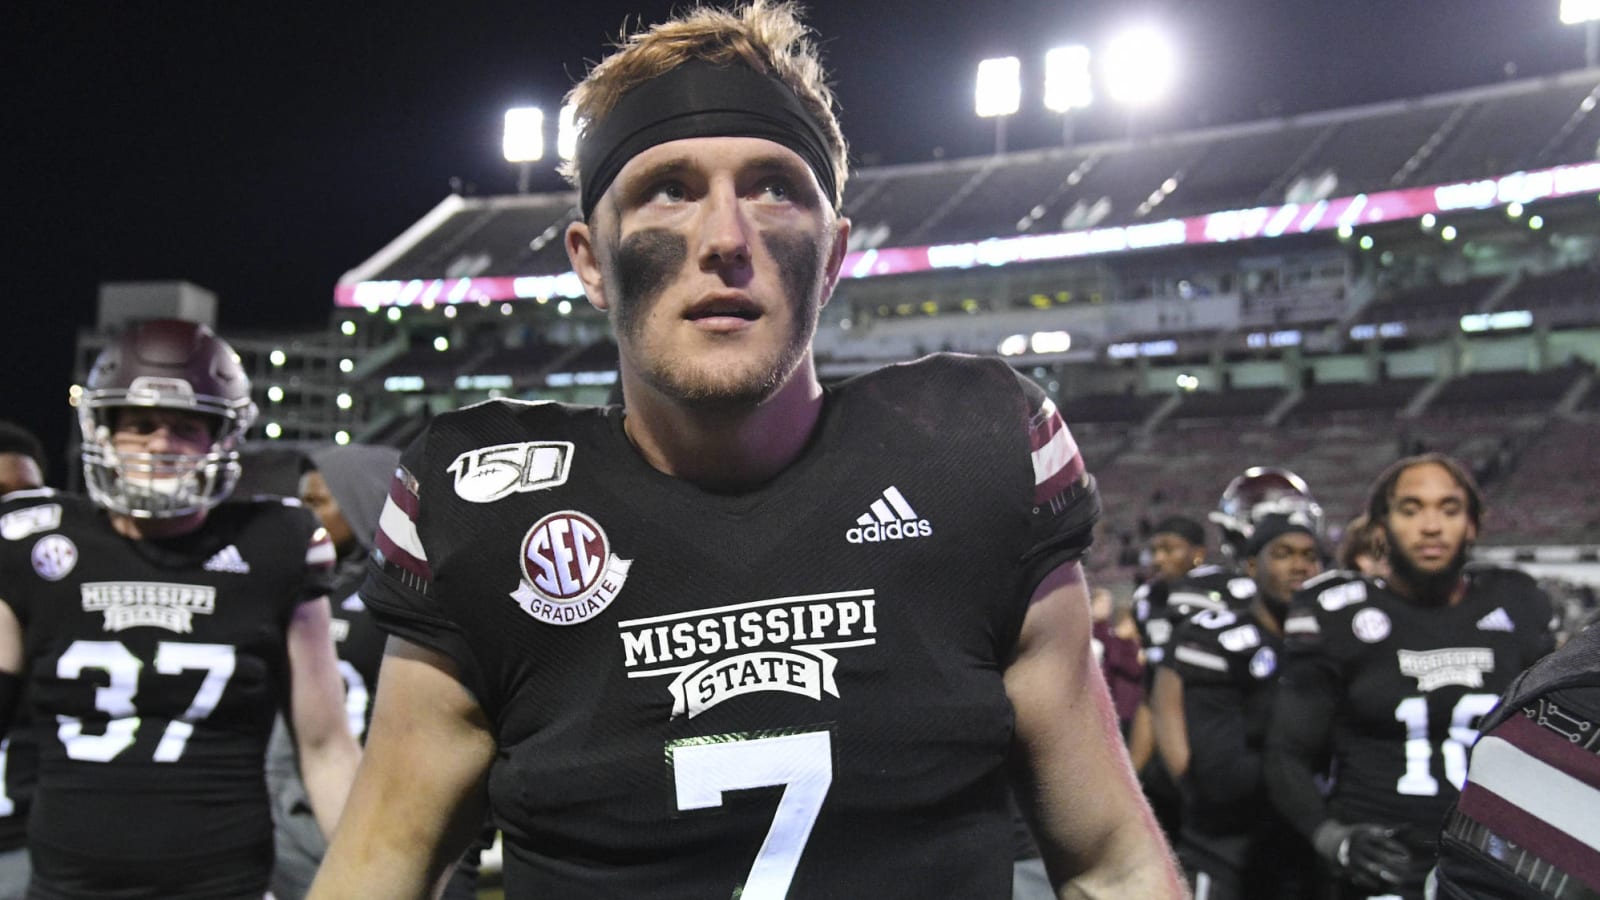 Miss State makes QB change before bowl game due to fight